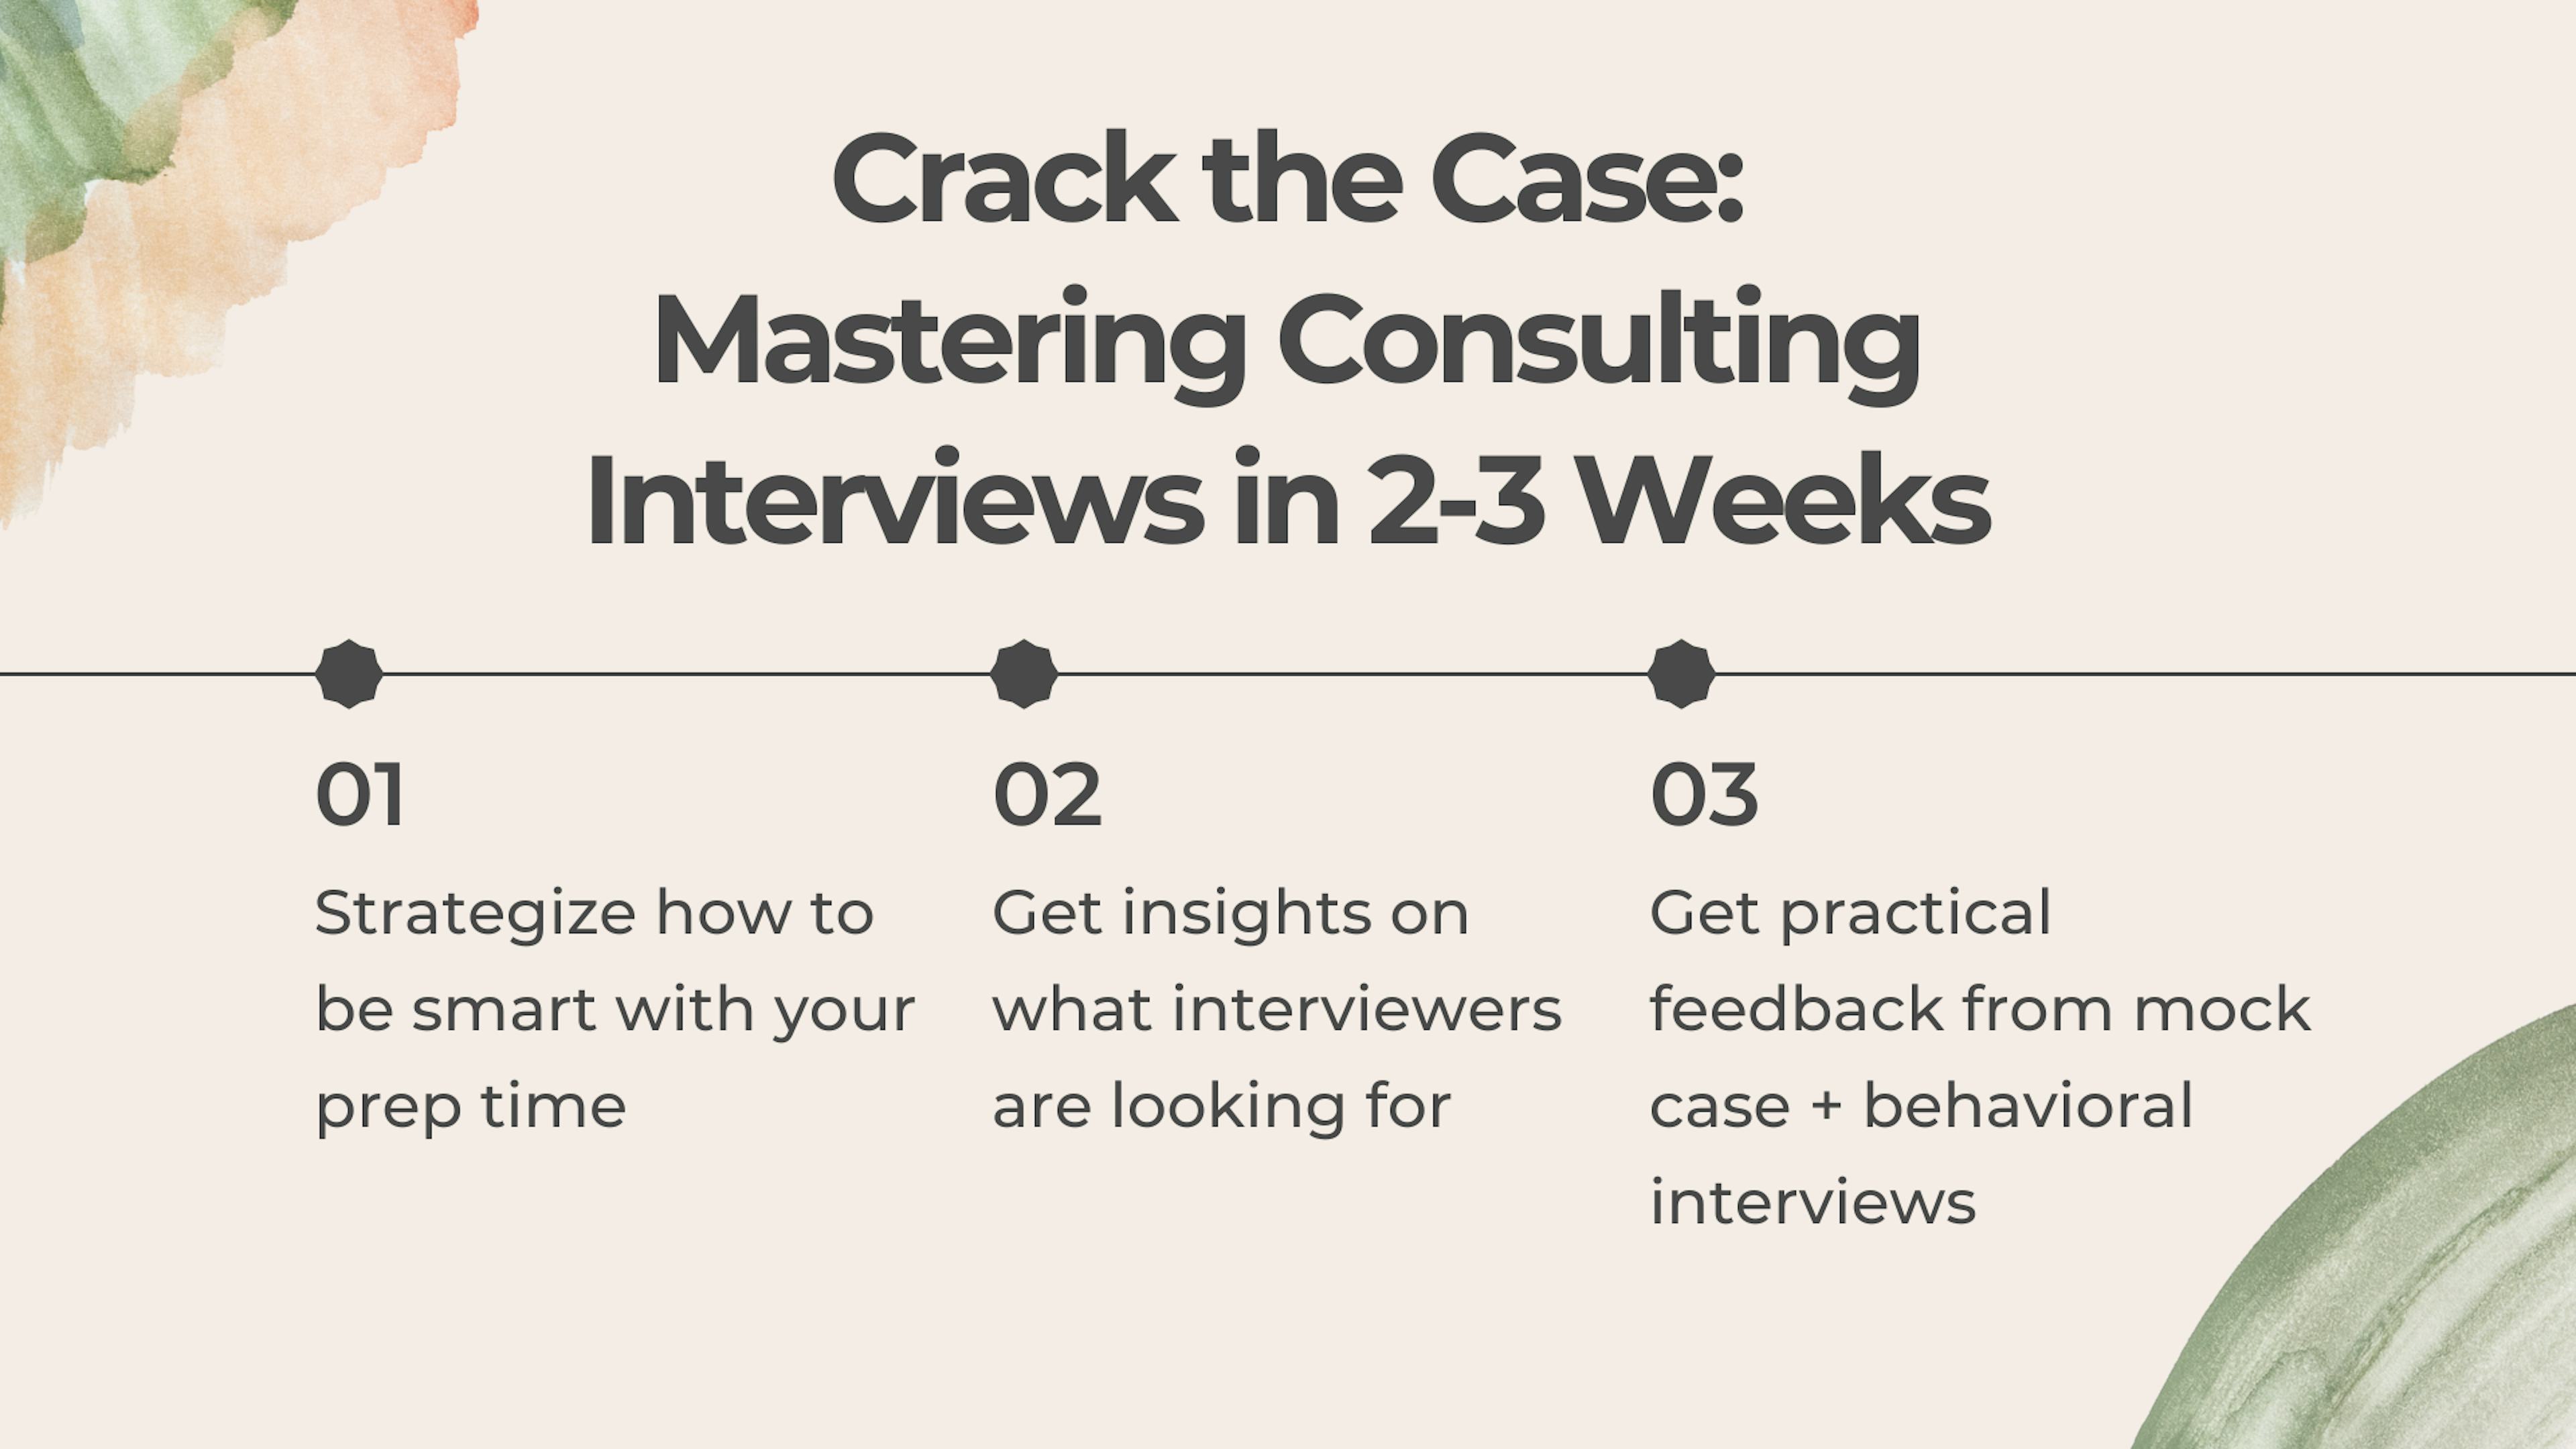 Master Consulting Interview in 2-3 Weeks